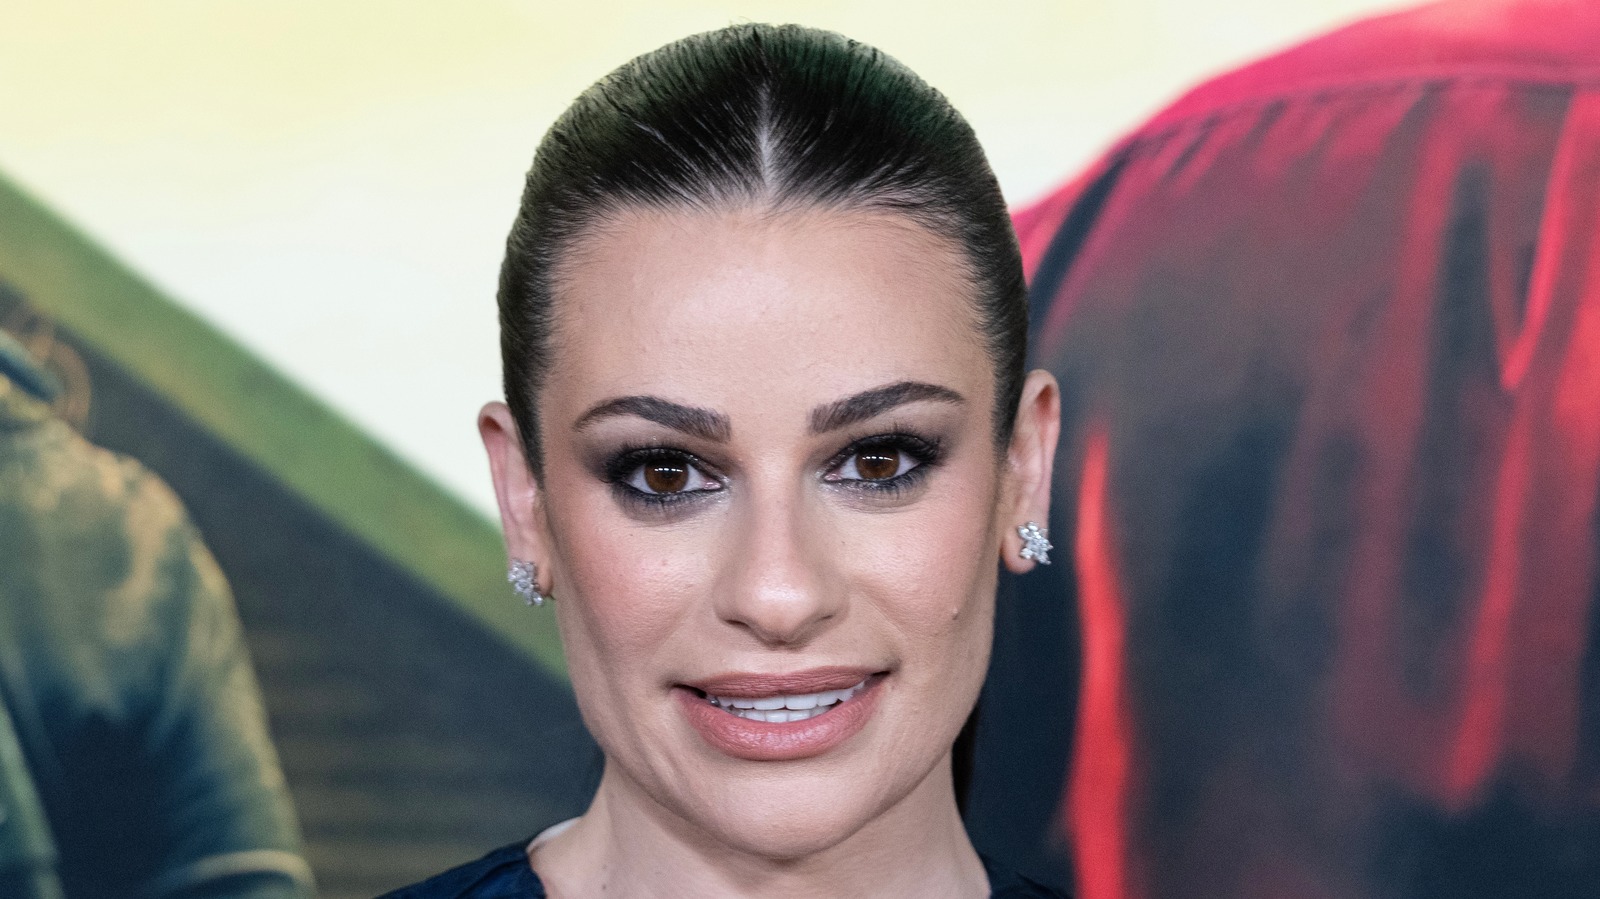 Lea Michele Can't Escape The Plastic Surgery Rumors After Her Face Transformation